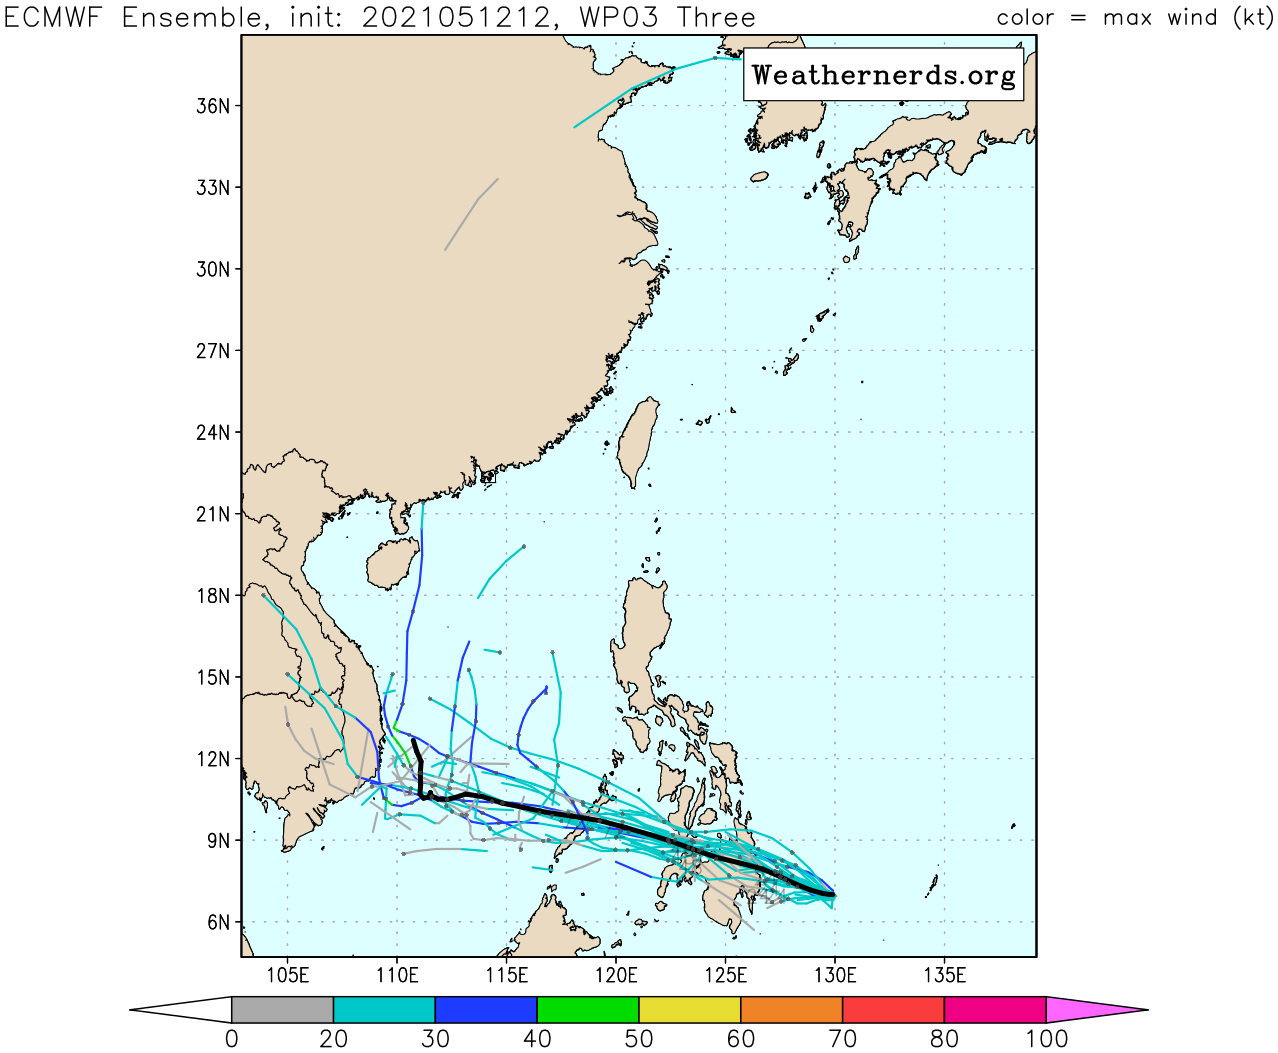 TD 03W. NUMERICAL MODEL GUIDANCE IS IN GOOD AGREEMENT, WITH MINIMAL SPREAD  THROUGH 72H, LENDING HIGH CONFIDENCE TO THE JTWC FORECAST TRACK. THE  INTENSITY FORECAST IS MORE UNCERTAIN, AS THE MAJORITY OF THE GUIDANCE IS  NOT HANDLING THE DEVELOPMENT OF THE COMPACT SYSTEM WELL, WITH SIGNIFICANT  DIVERGENCE IN THE INTENSITY FORECAST SOLUTIONS. THE JTWC INTENSITY FORECAST  IS HIGHLY UNCERTAIN, IN LARGE PART ESTIMATED BASED ON CURRENT TRENDS, WHICH  ARE NOT EFFECTIVELY CAPTURED IN THE MOST RECENT MODEL GUIDANCE, RESULTING  IN LOW CONFIDENCE IN THE INTENSITY FORECAST.